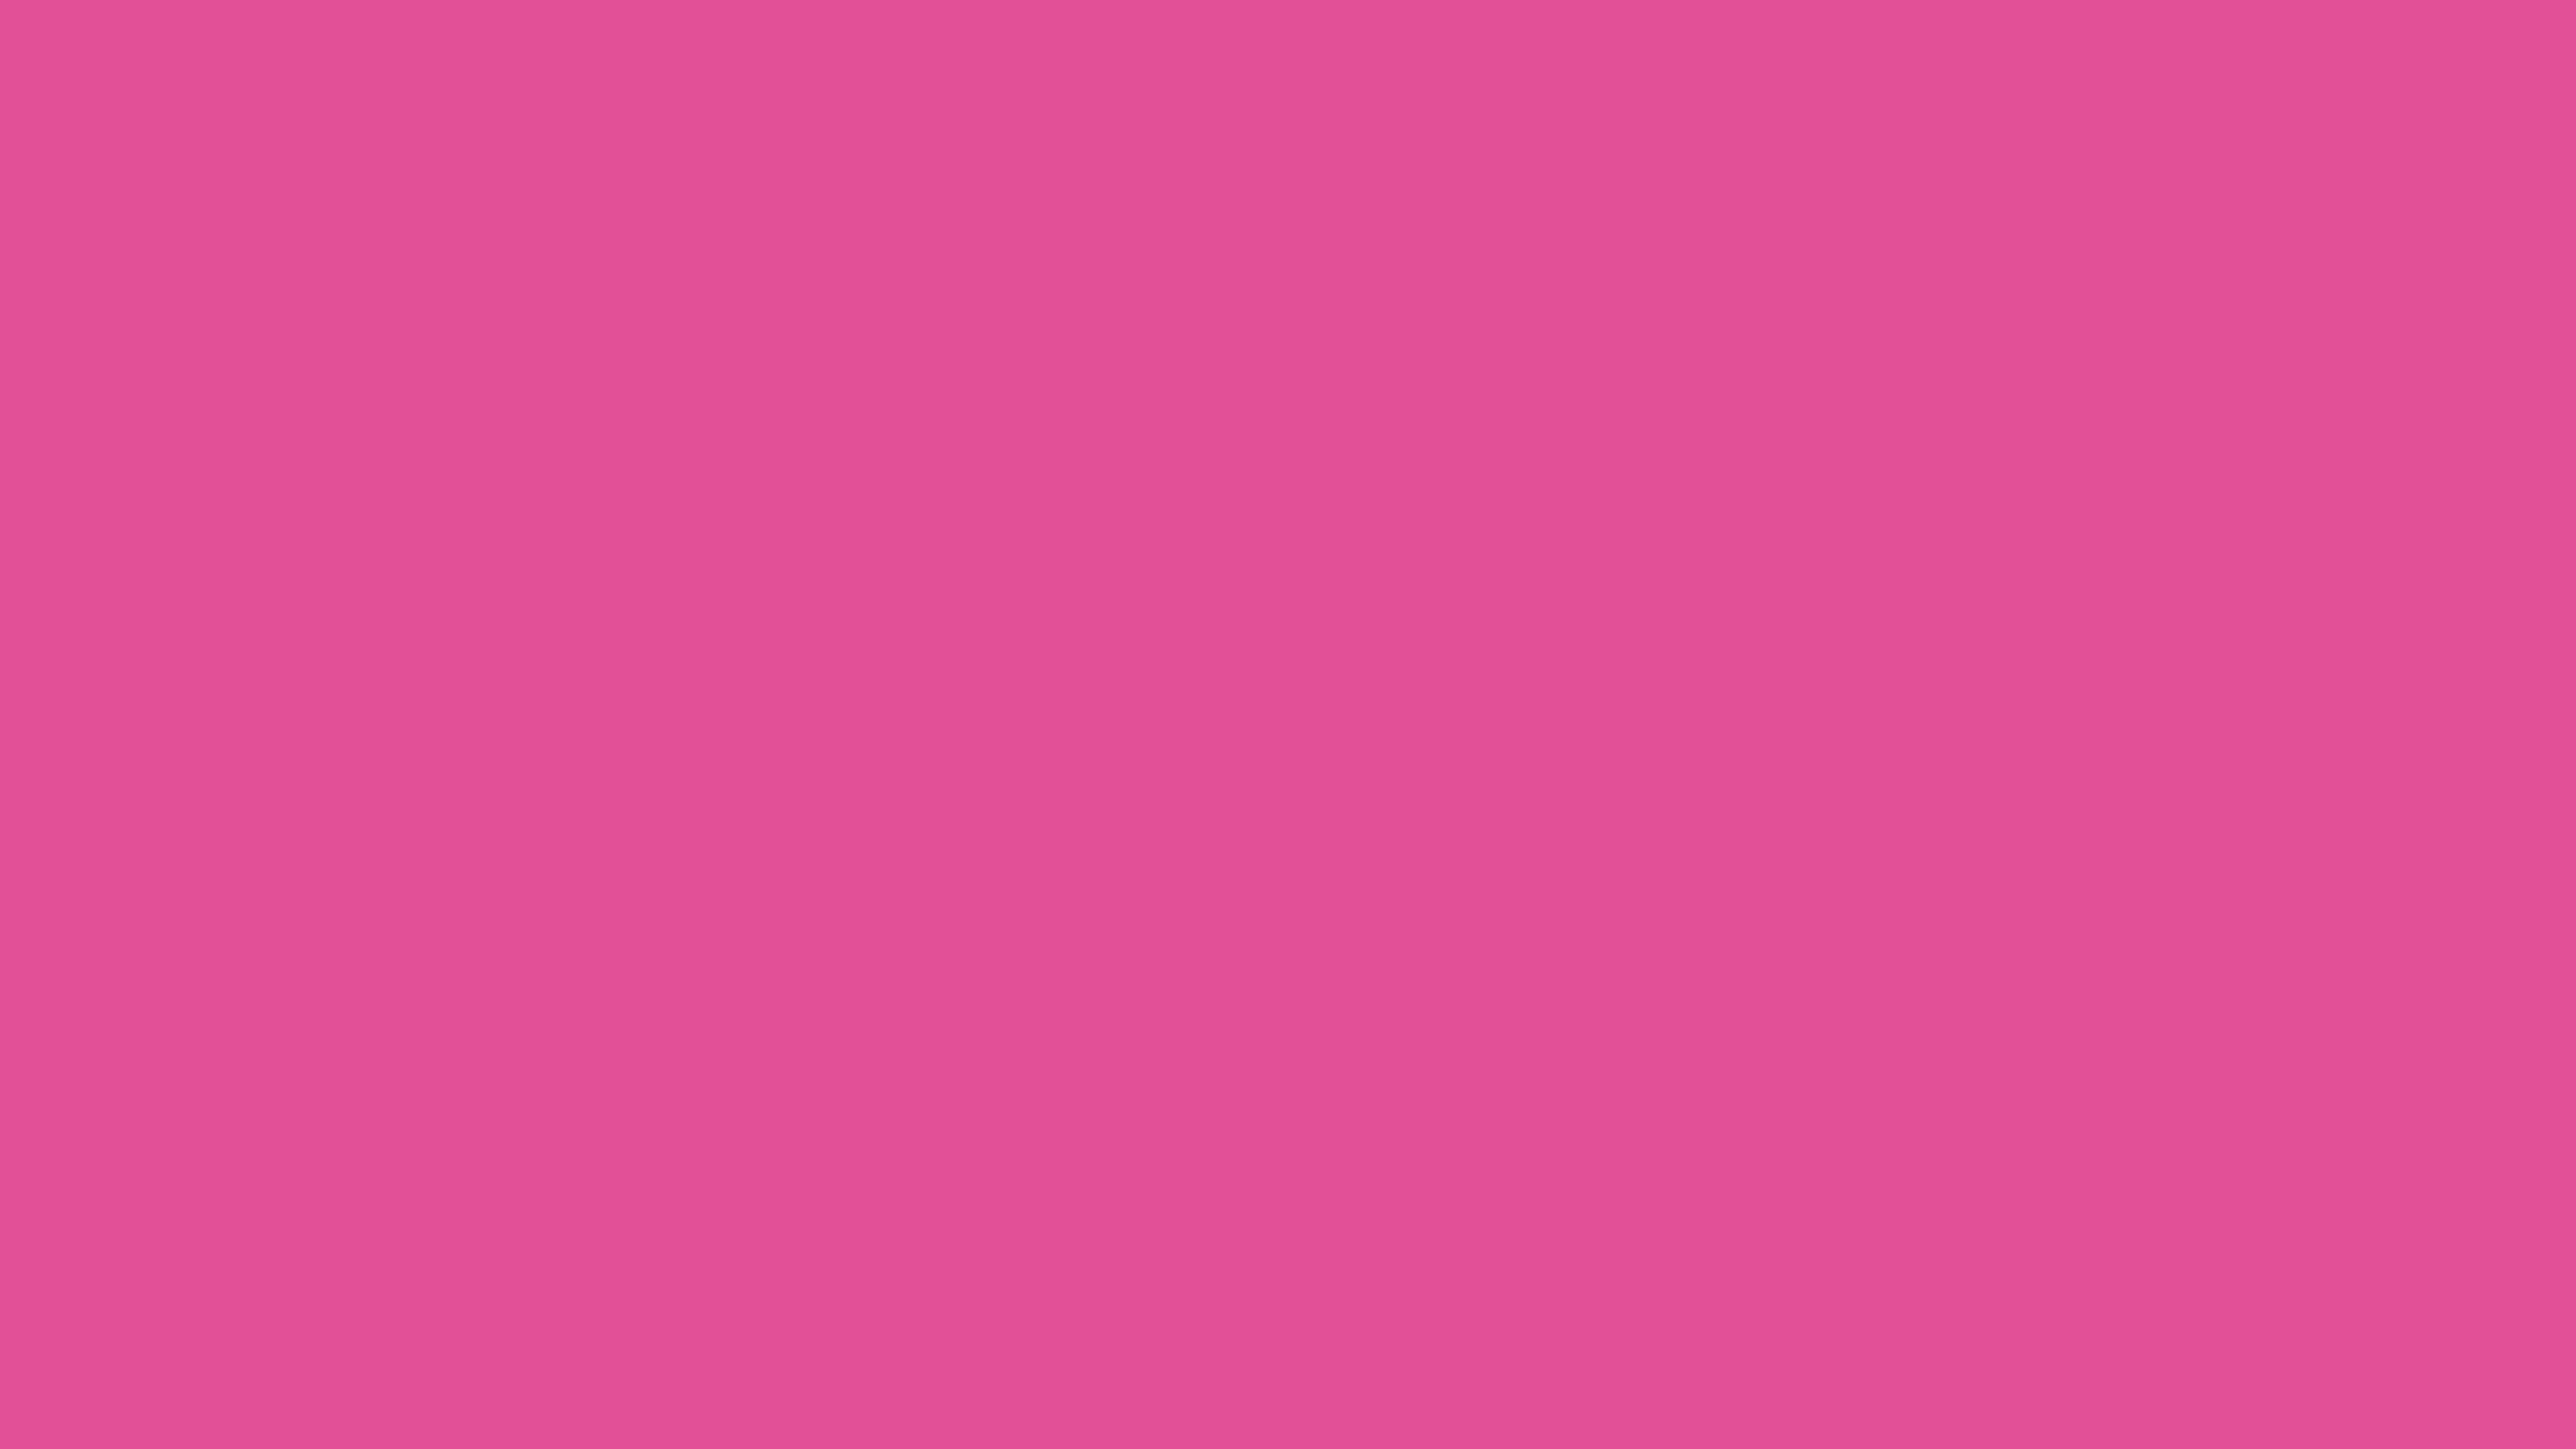 7680x4320 Raspberry Pink Solid Color Background